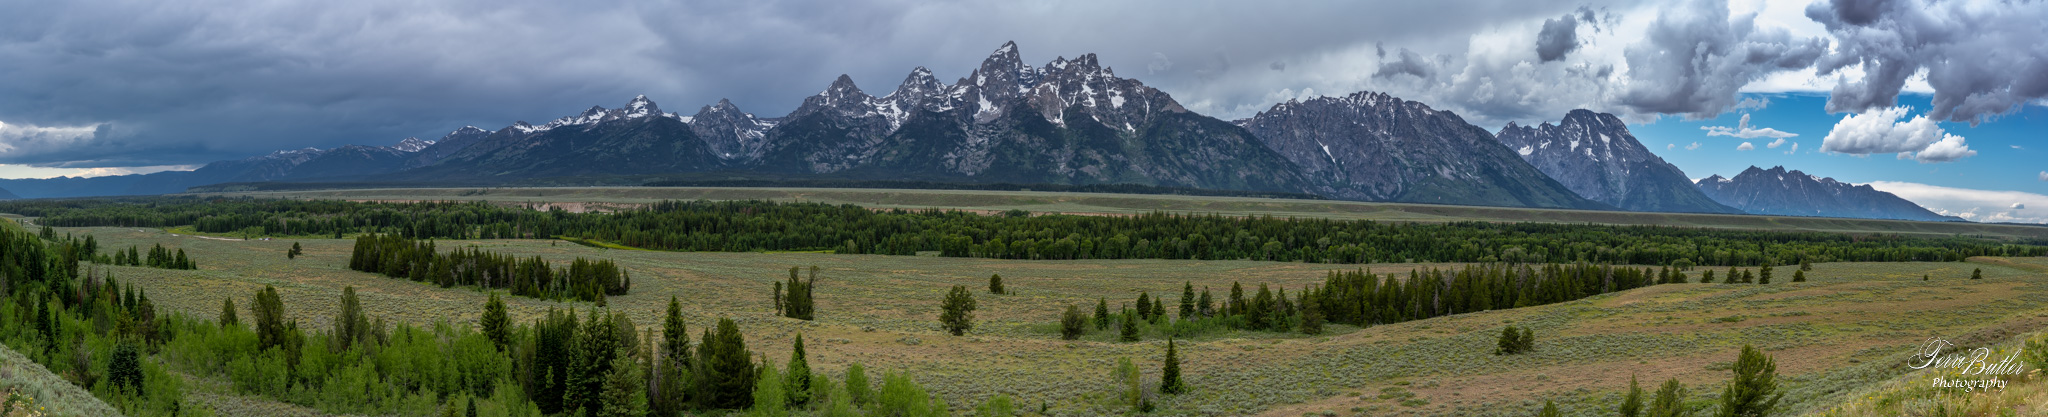 Storm Over the Tetons